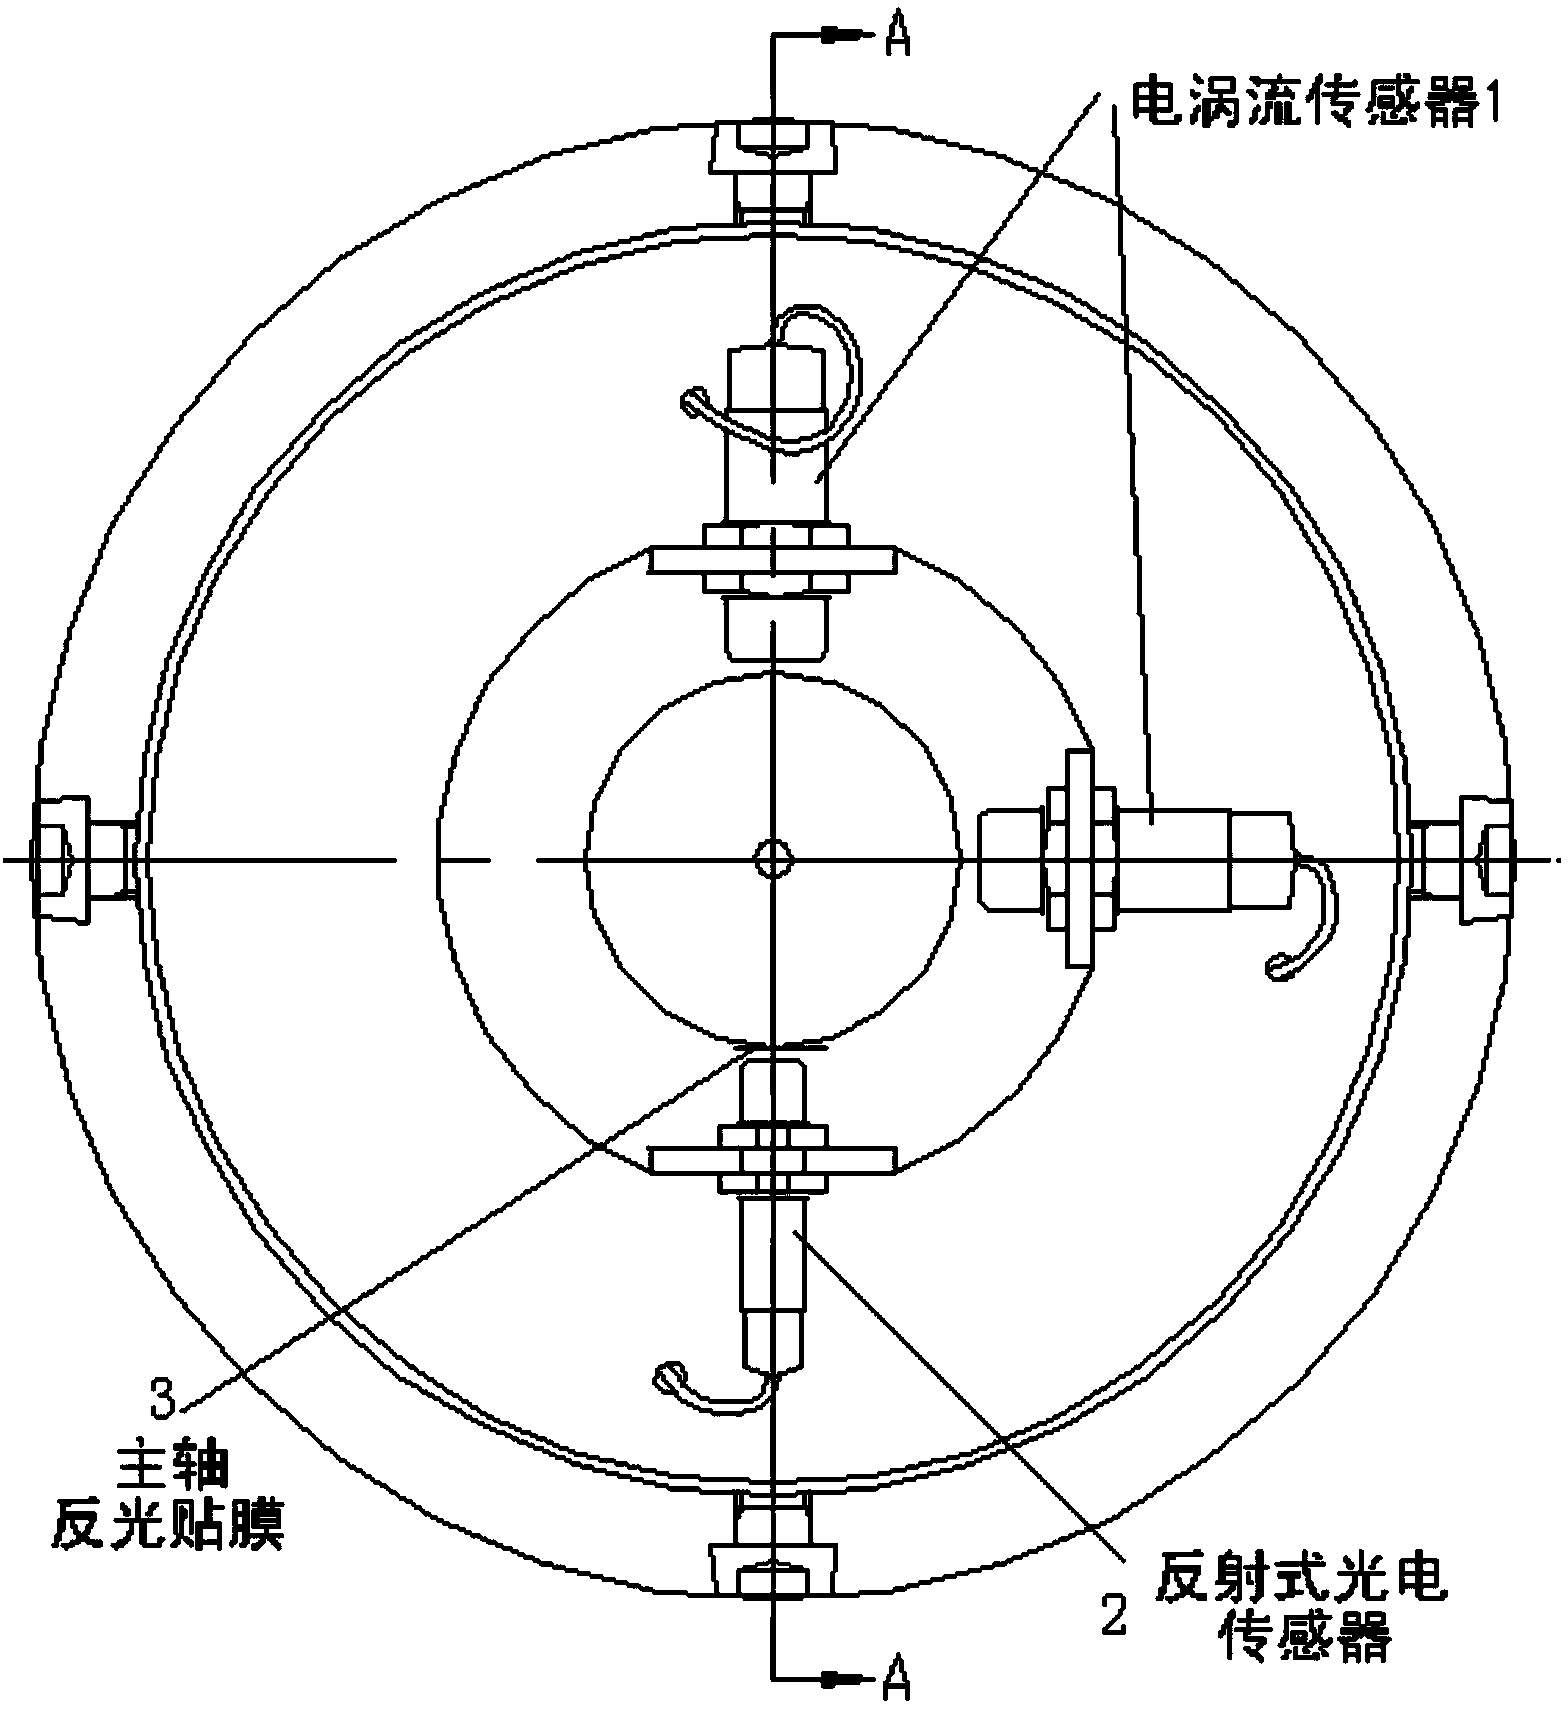 Dynamic spindle rotation precision detection device